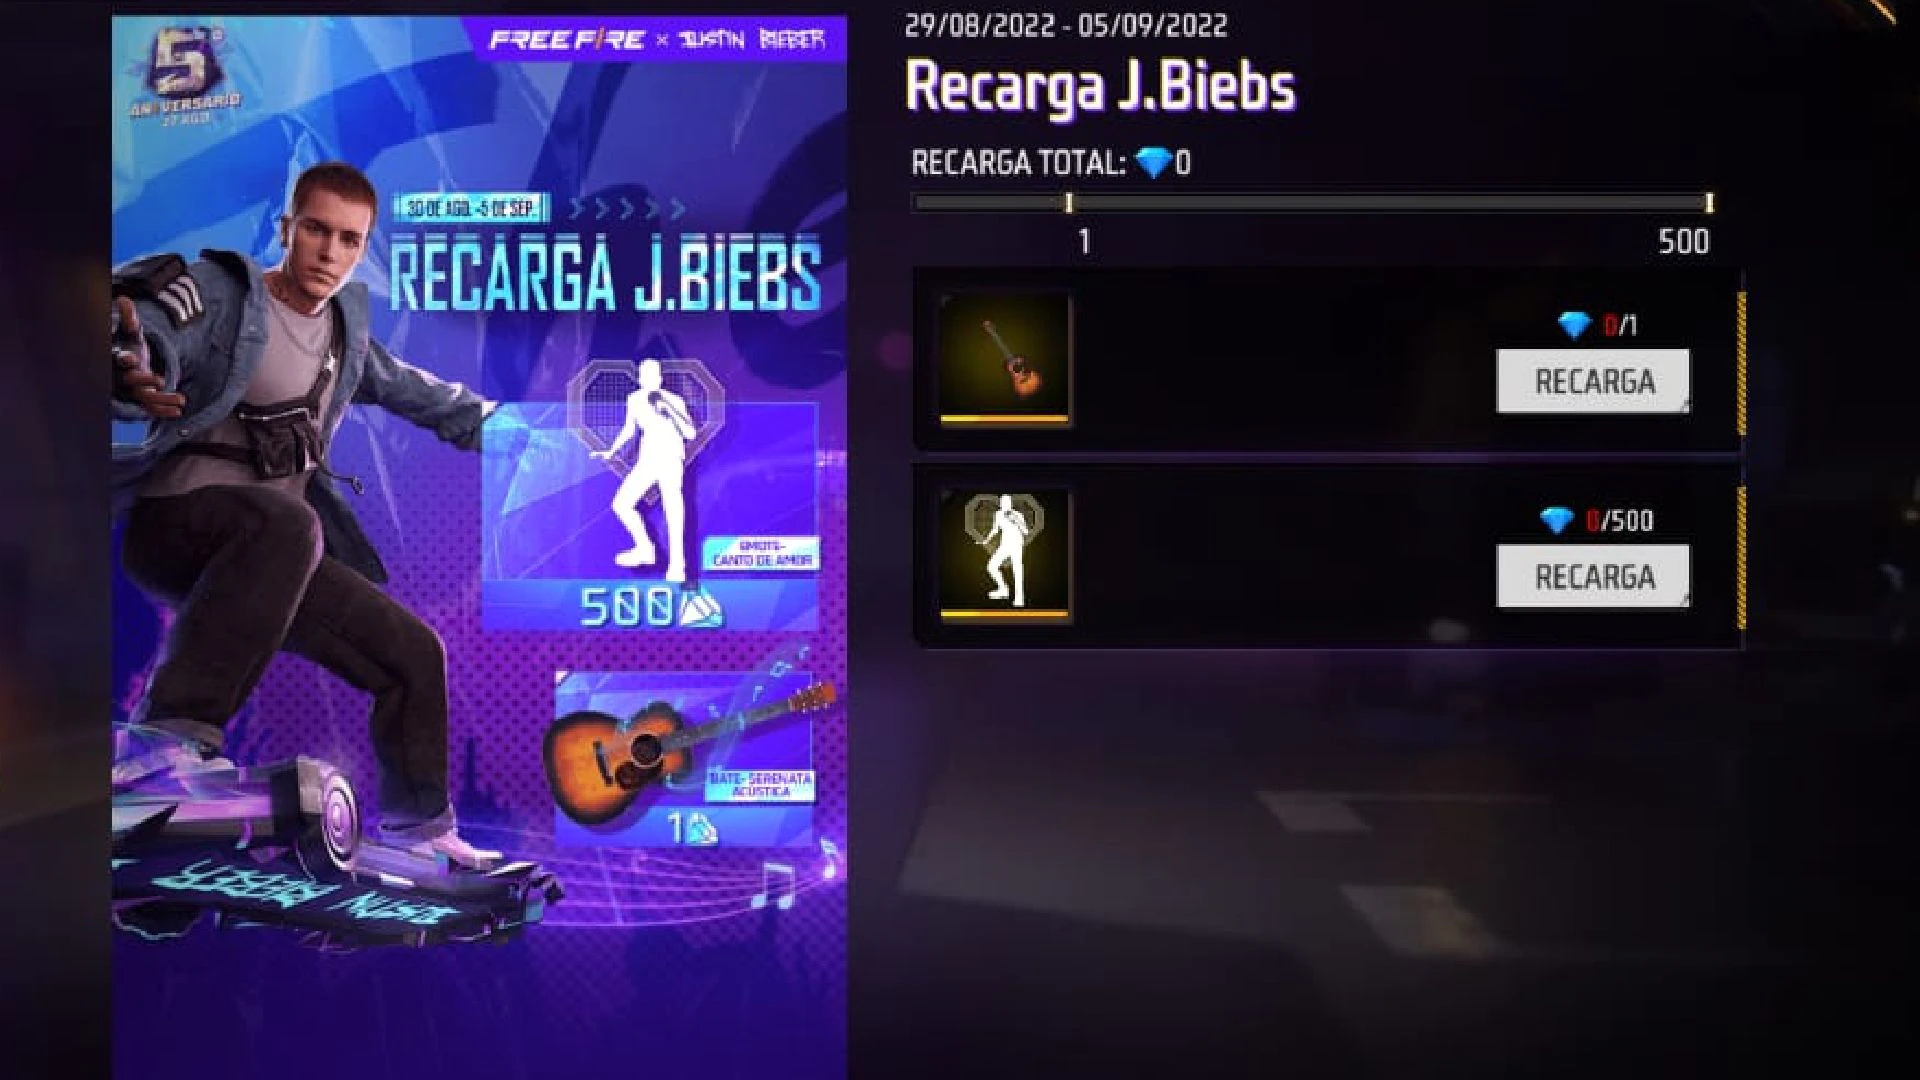 Free Fire: how to get the "Recharge J.Biebs" rewards